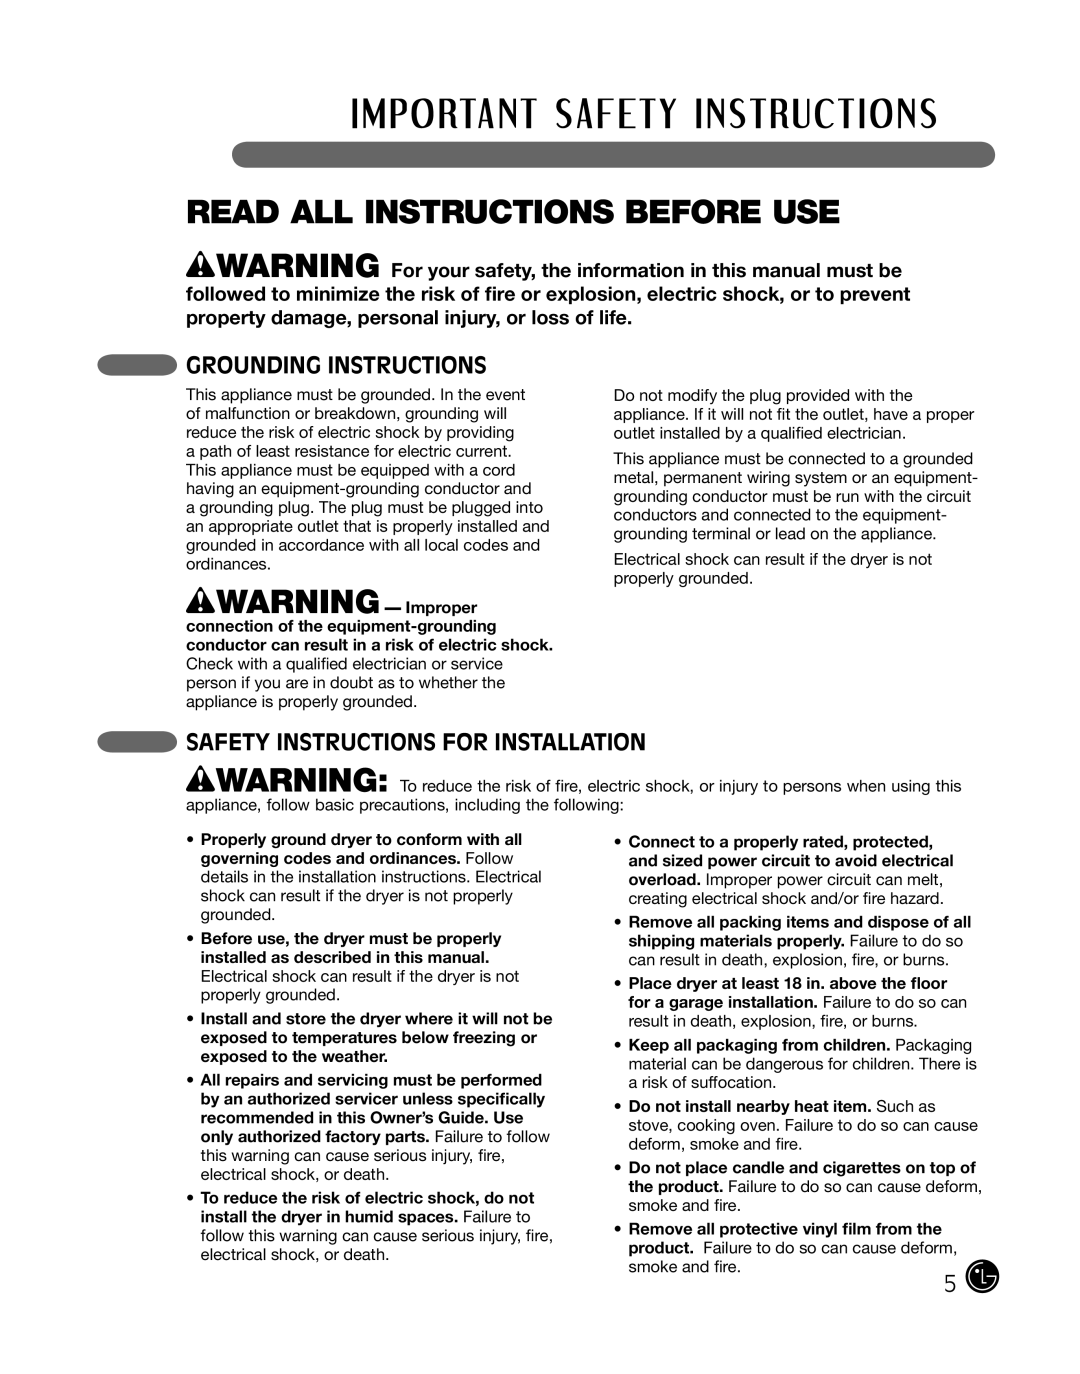 LG Electronics P154 manual Grounding Instructions, Safety Instructions For Installation, Read All Instructions Before Use 